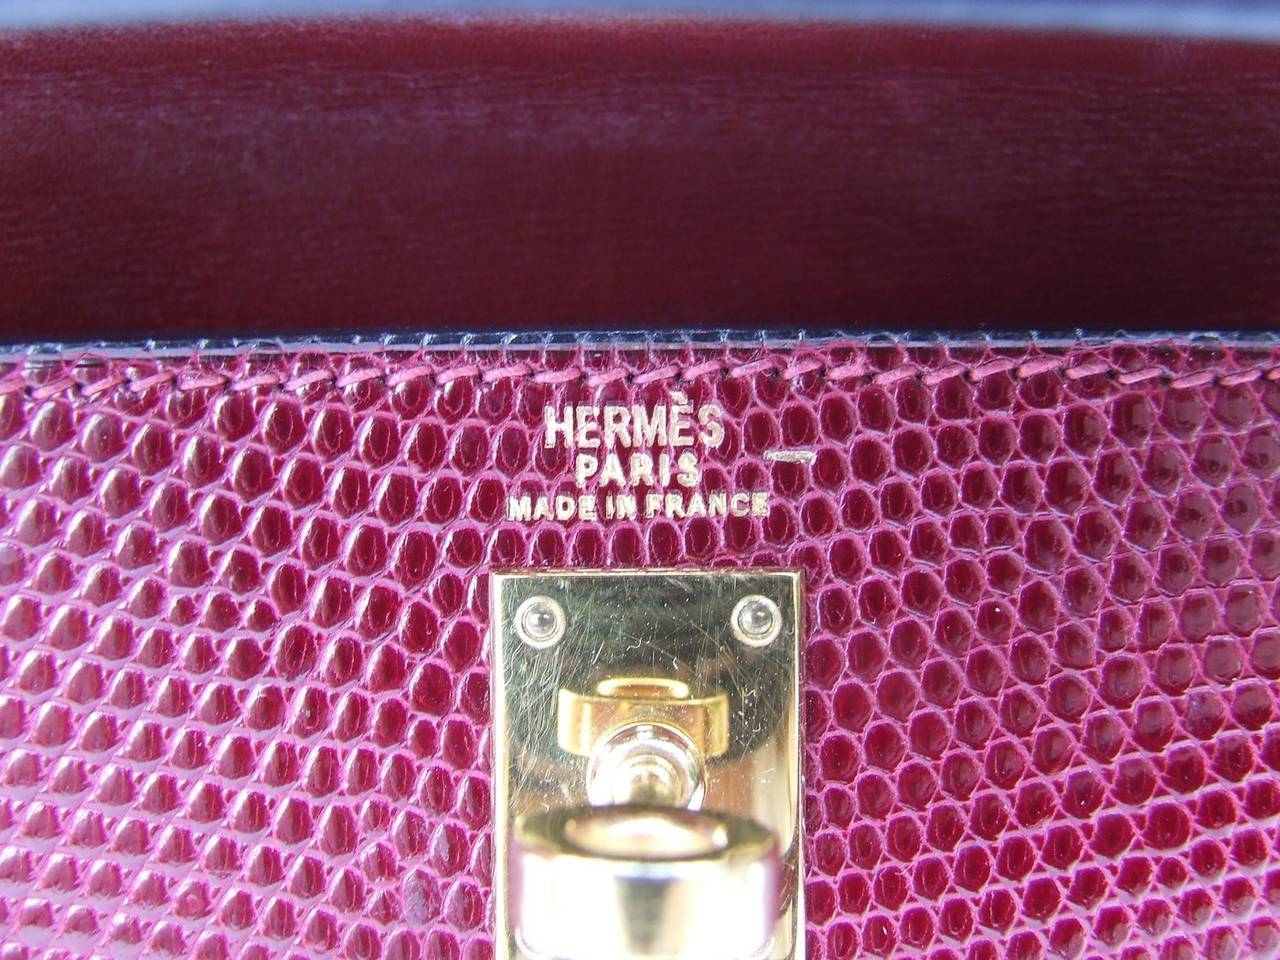 GORGEOUS and RARE AUTHENTIC HERMES BAG

MINI KELLY

So rare to find a baby Kelly with both handle and shoulder strap, especially in Lizard skin and Rouge Hermès colorway, and in such great condition

Made in France in 90's

Made of Lizard